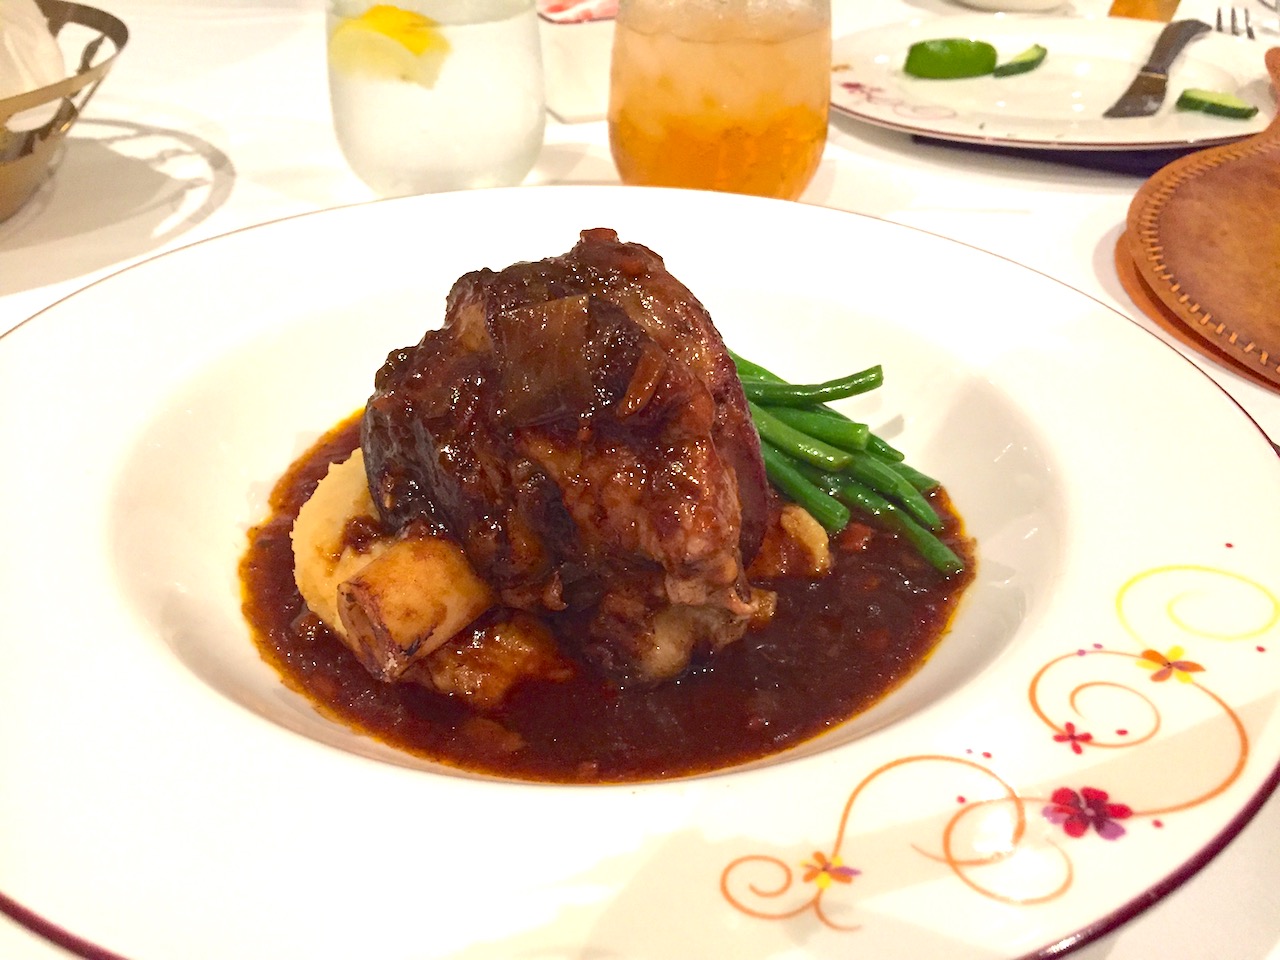 Lamb shank at Lumiere's on board the Disney Magic is one of the best pieces of lamb you'll ever eat!